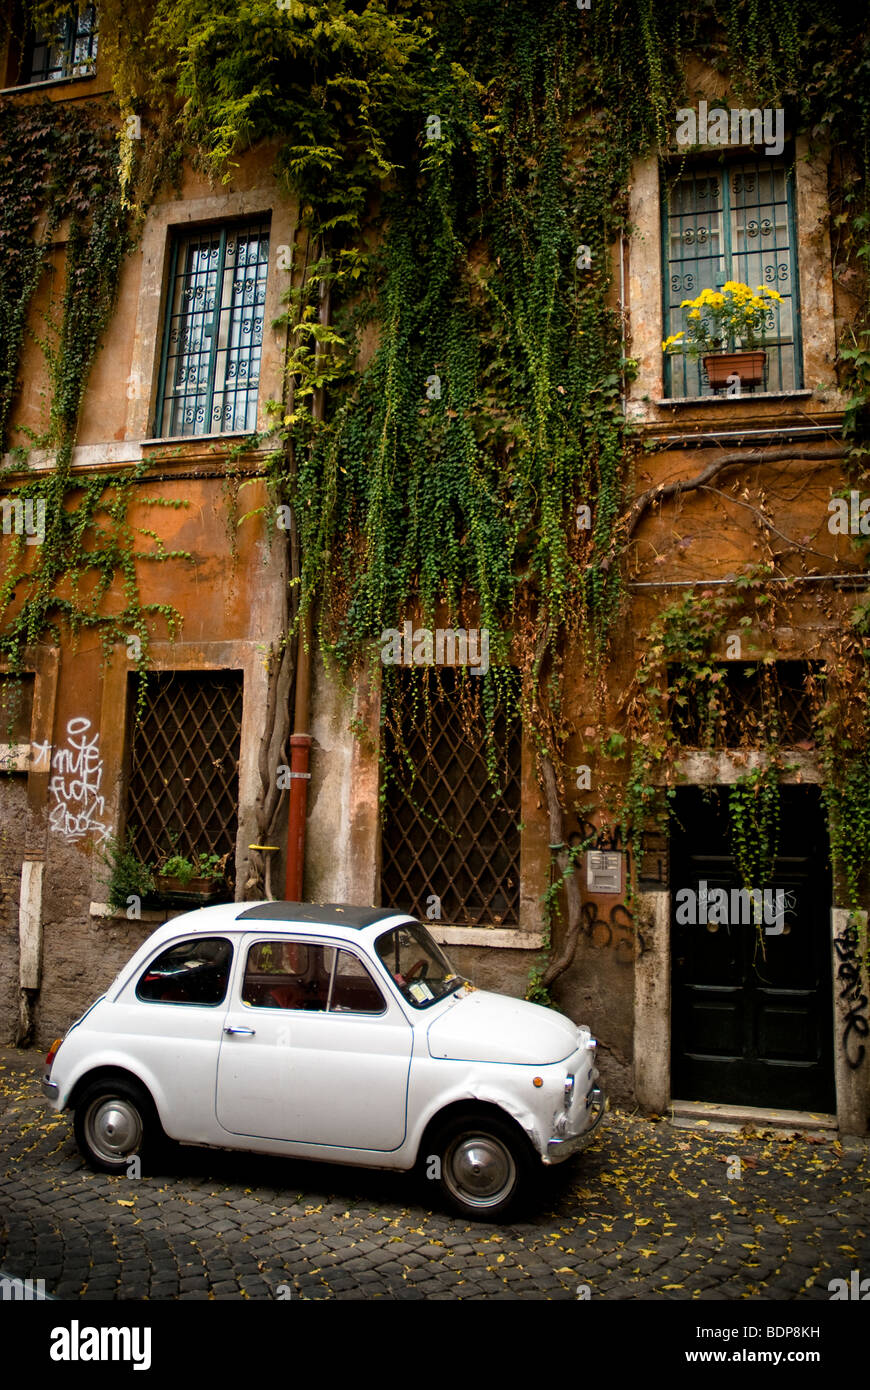 White Fiat 500 Bambino, parked in cobble stoned street in Trastevere, district of Rome, Italy Stock Photo